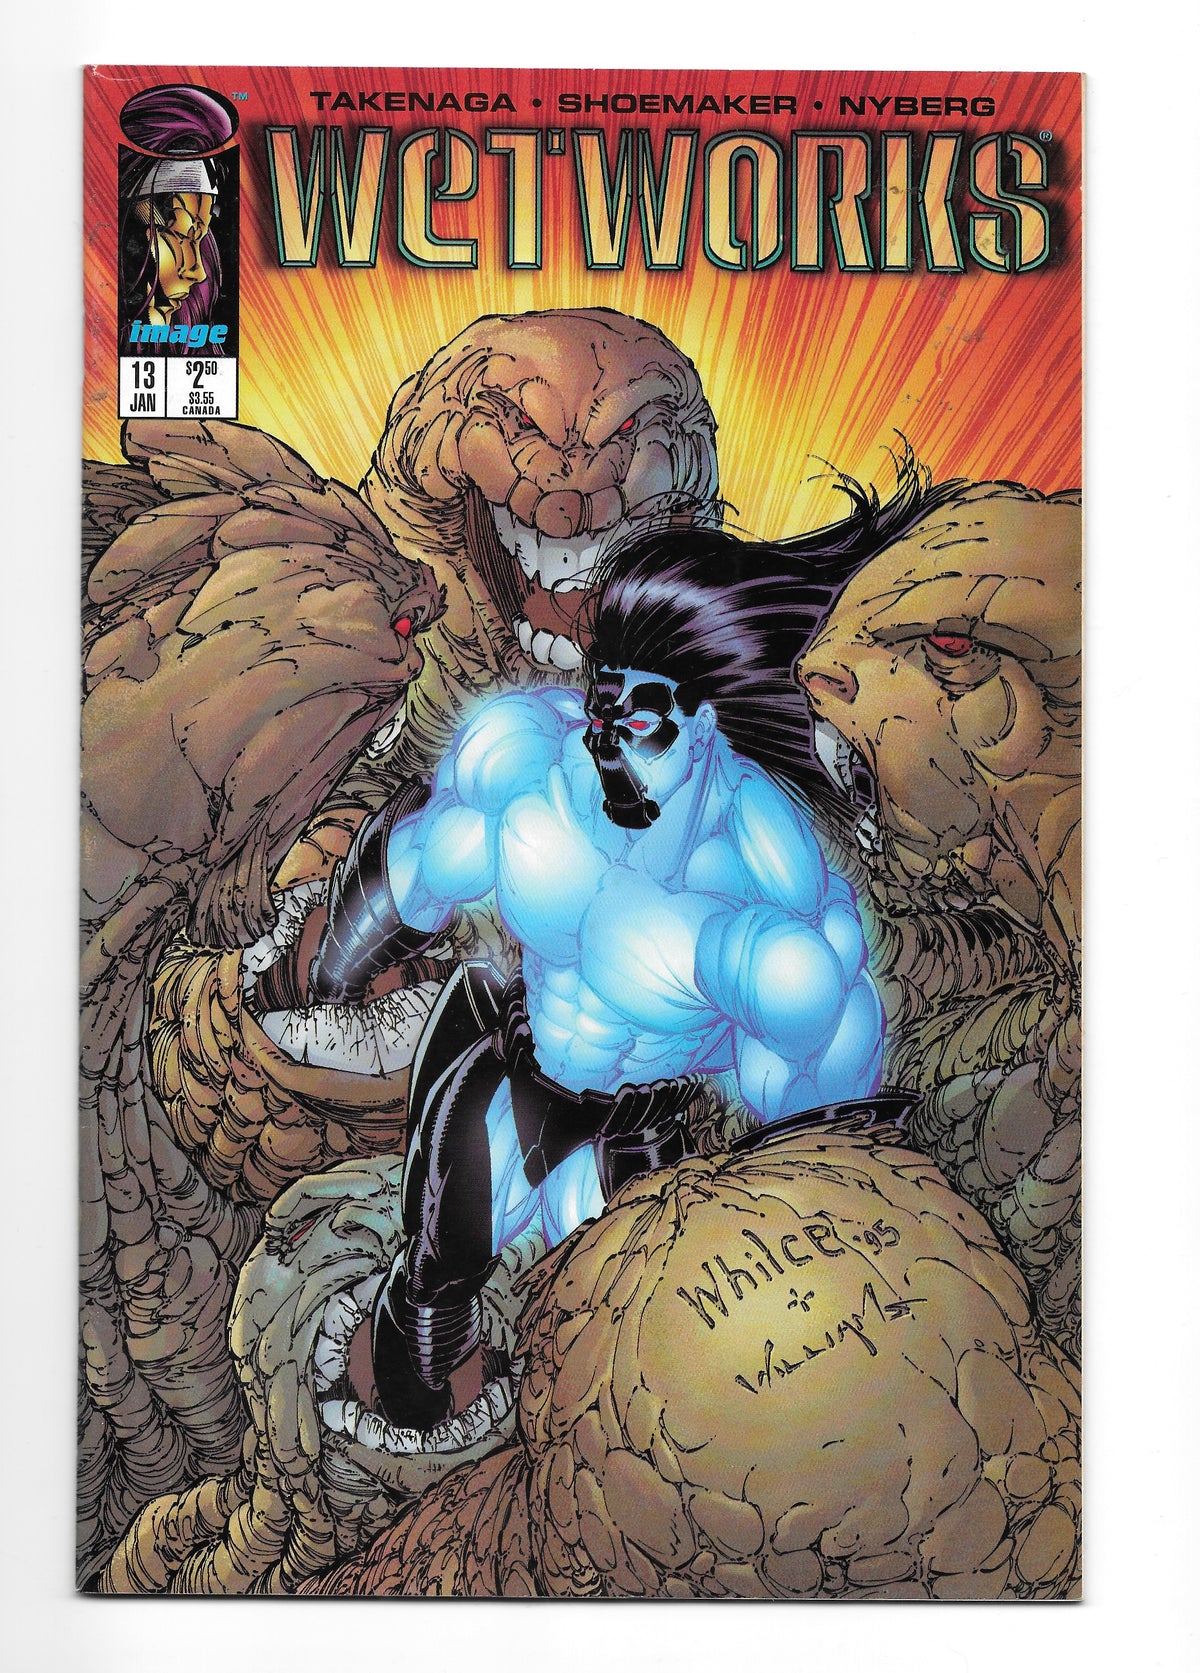 Photo of Wetworks, Vol. 1 (1996)  Iss 13 Very Fine  Comic sold by Stronghold Collectibles